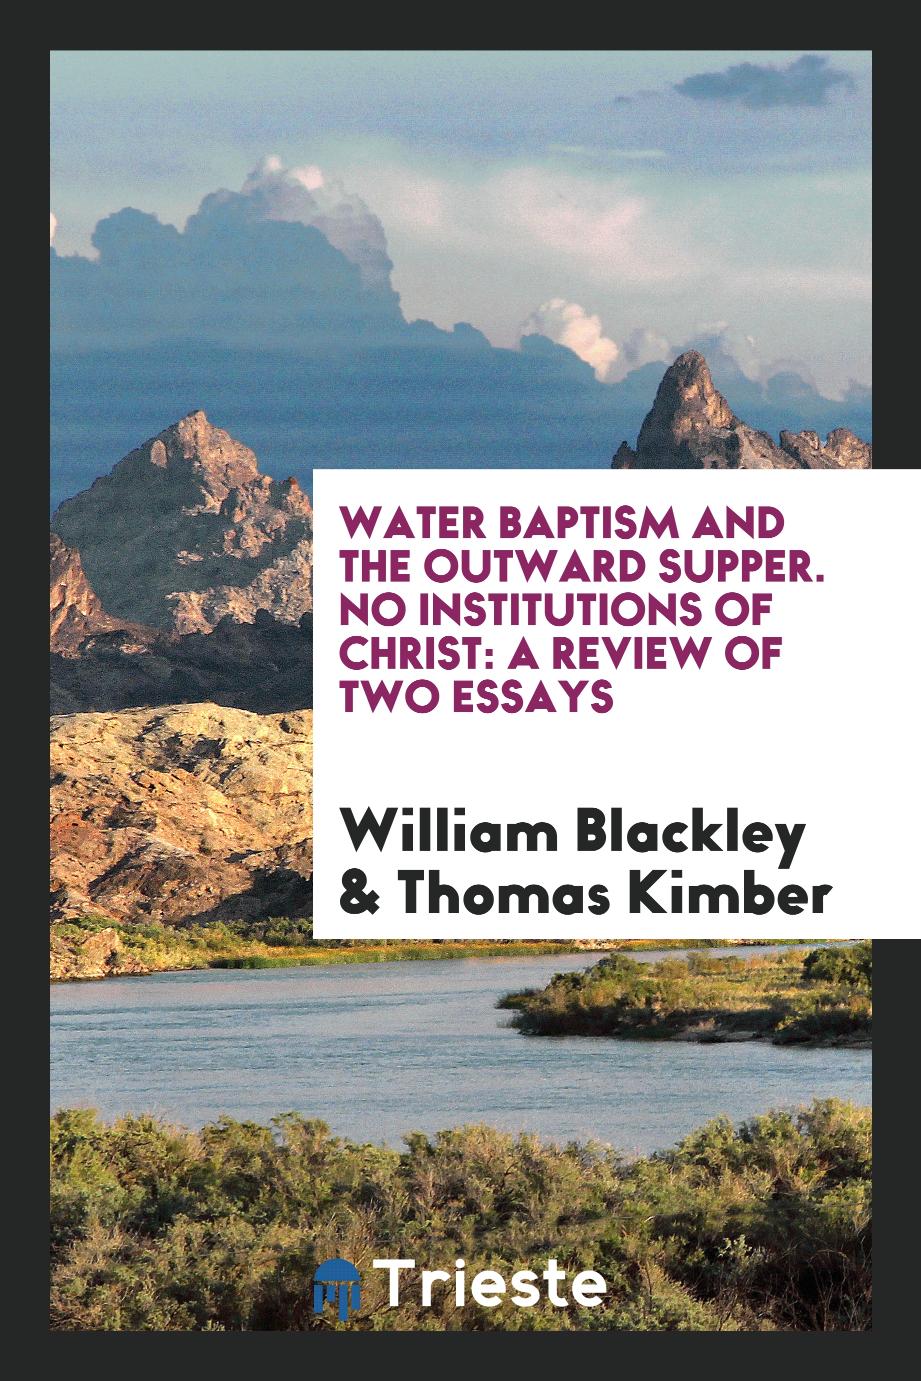 Water Baptism and the Outward Supper. No Institutions of Christ: A Review of Two Essays